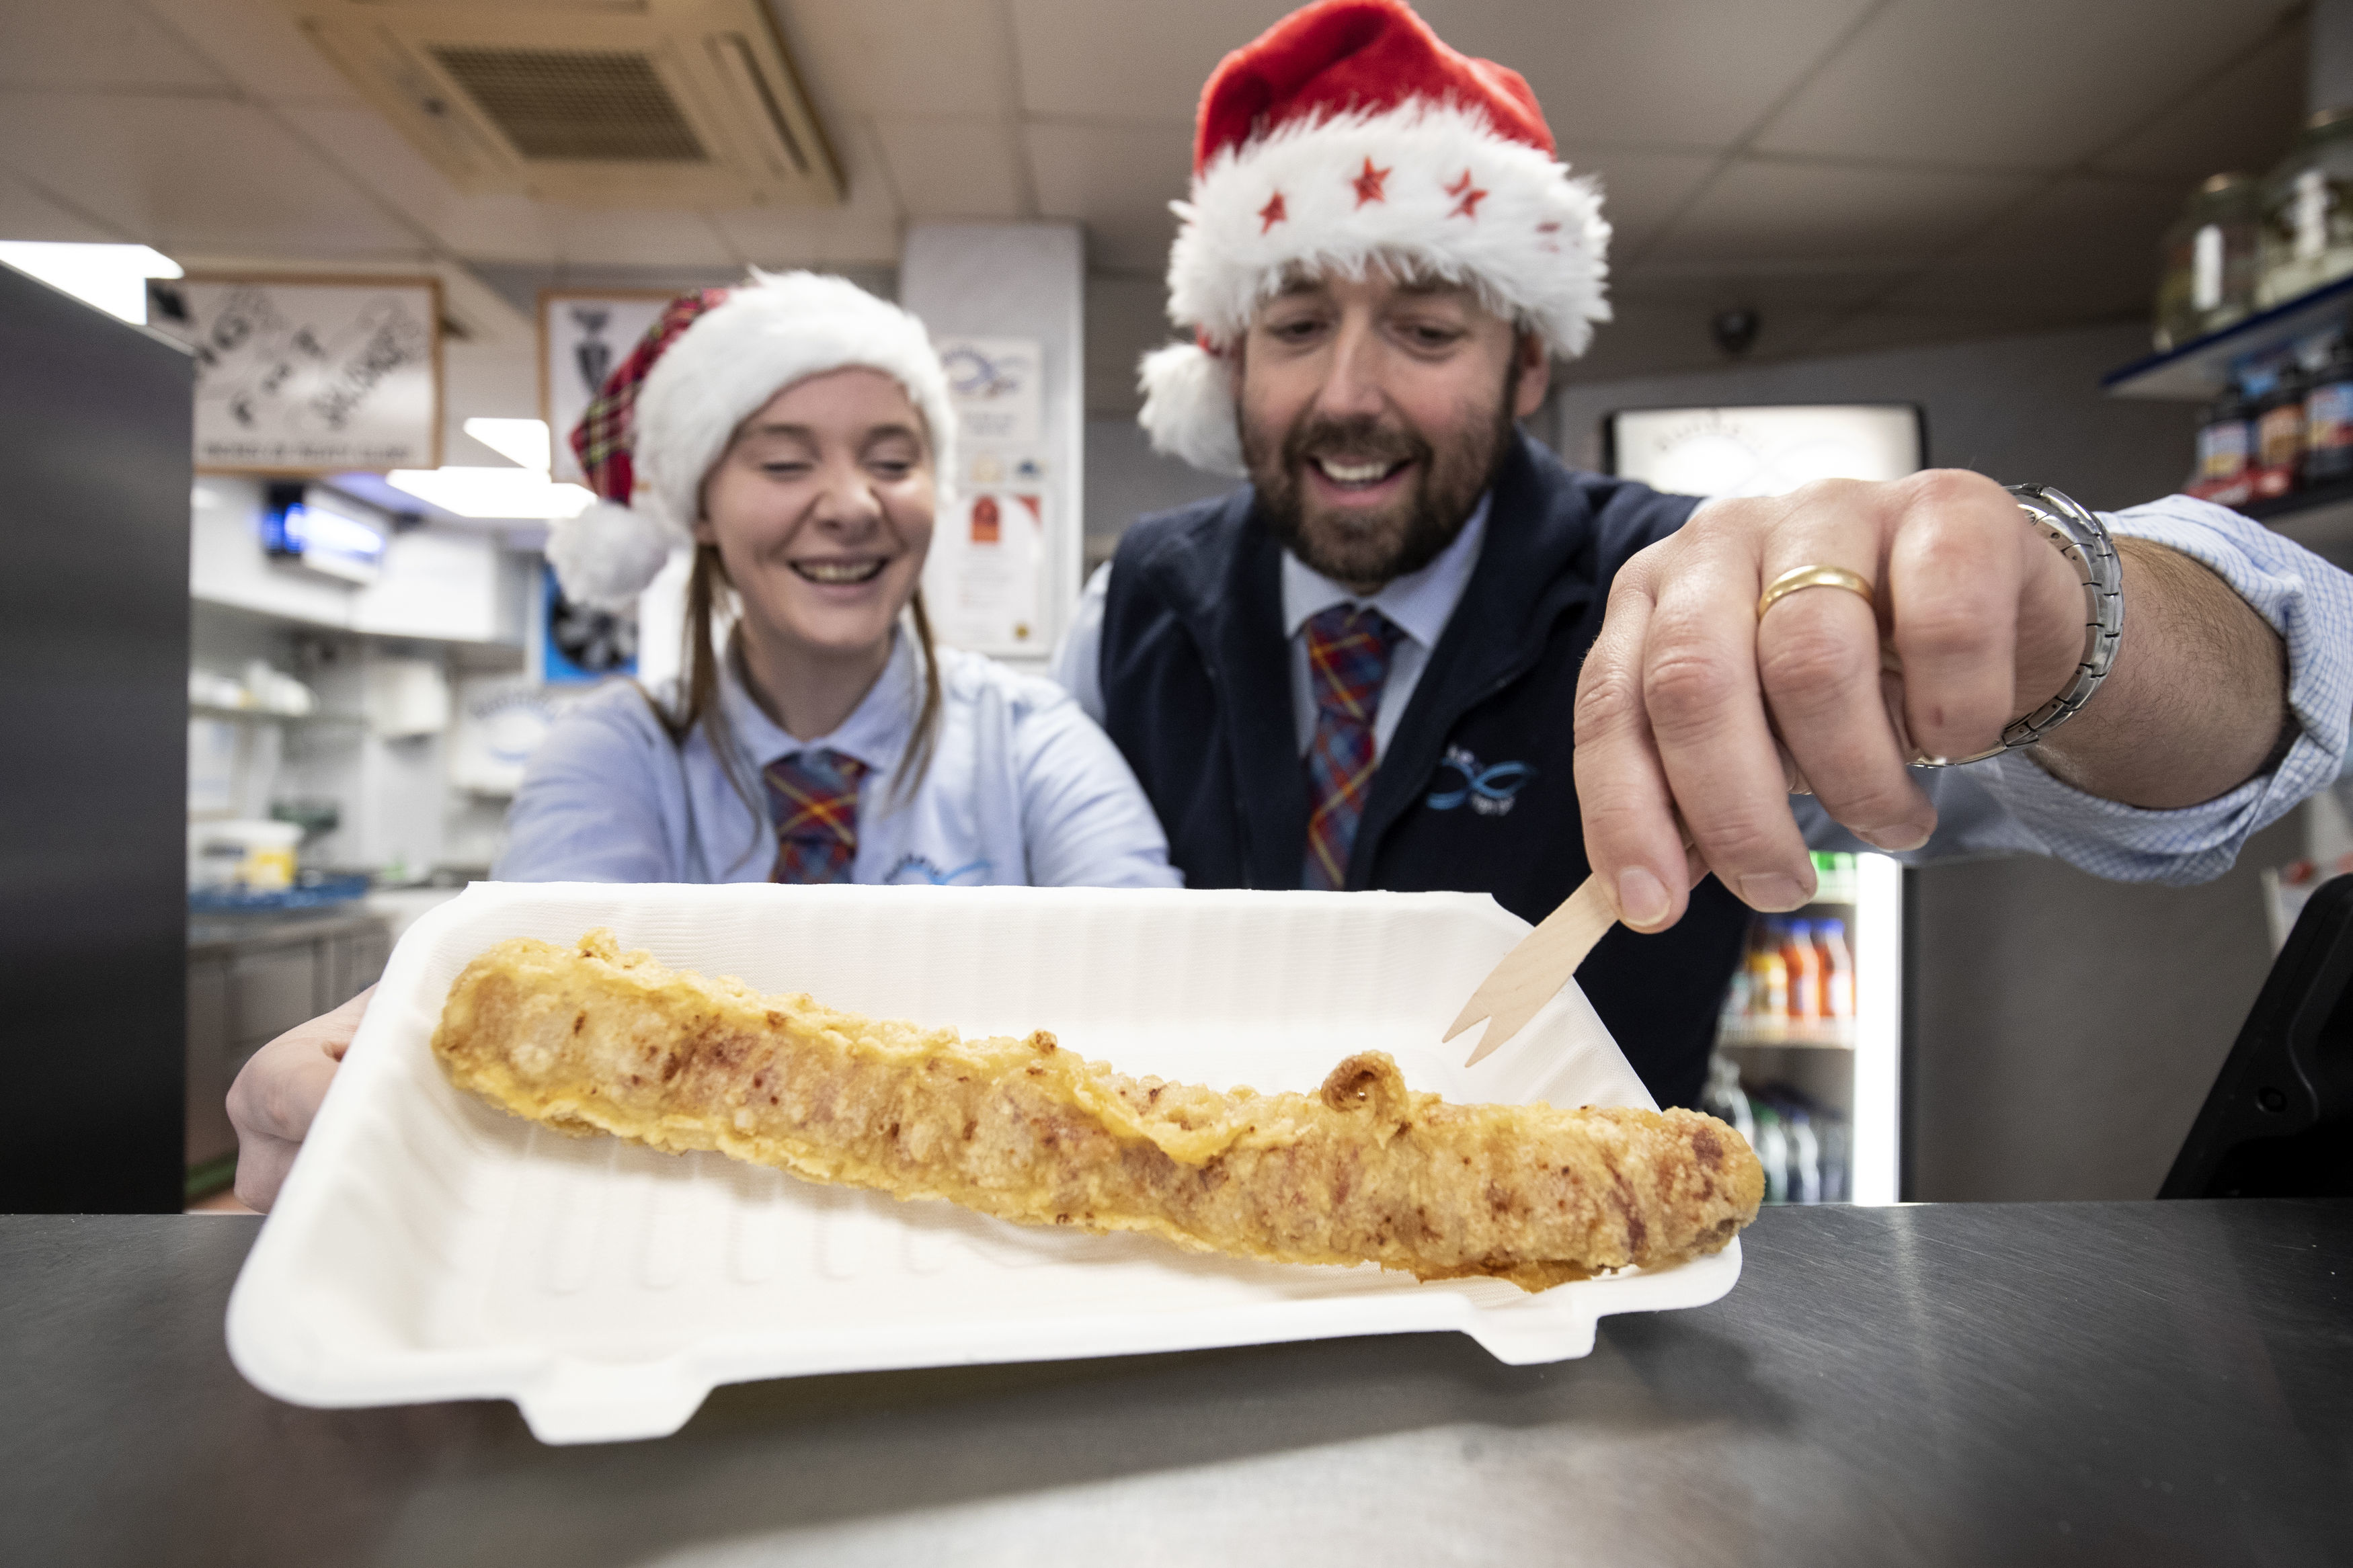 Chelsea McGowan and chip-shop owner Scott Davie serve up a deep-fried pig-in-blanket.